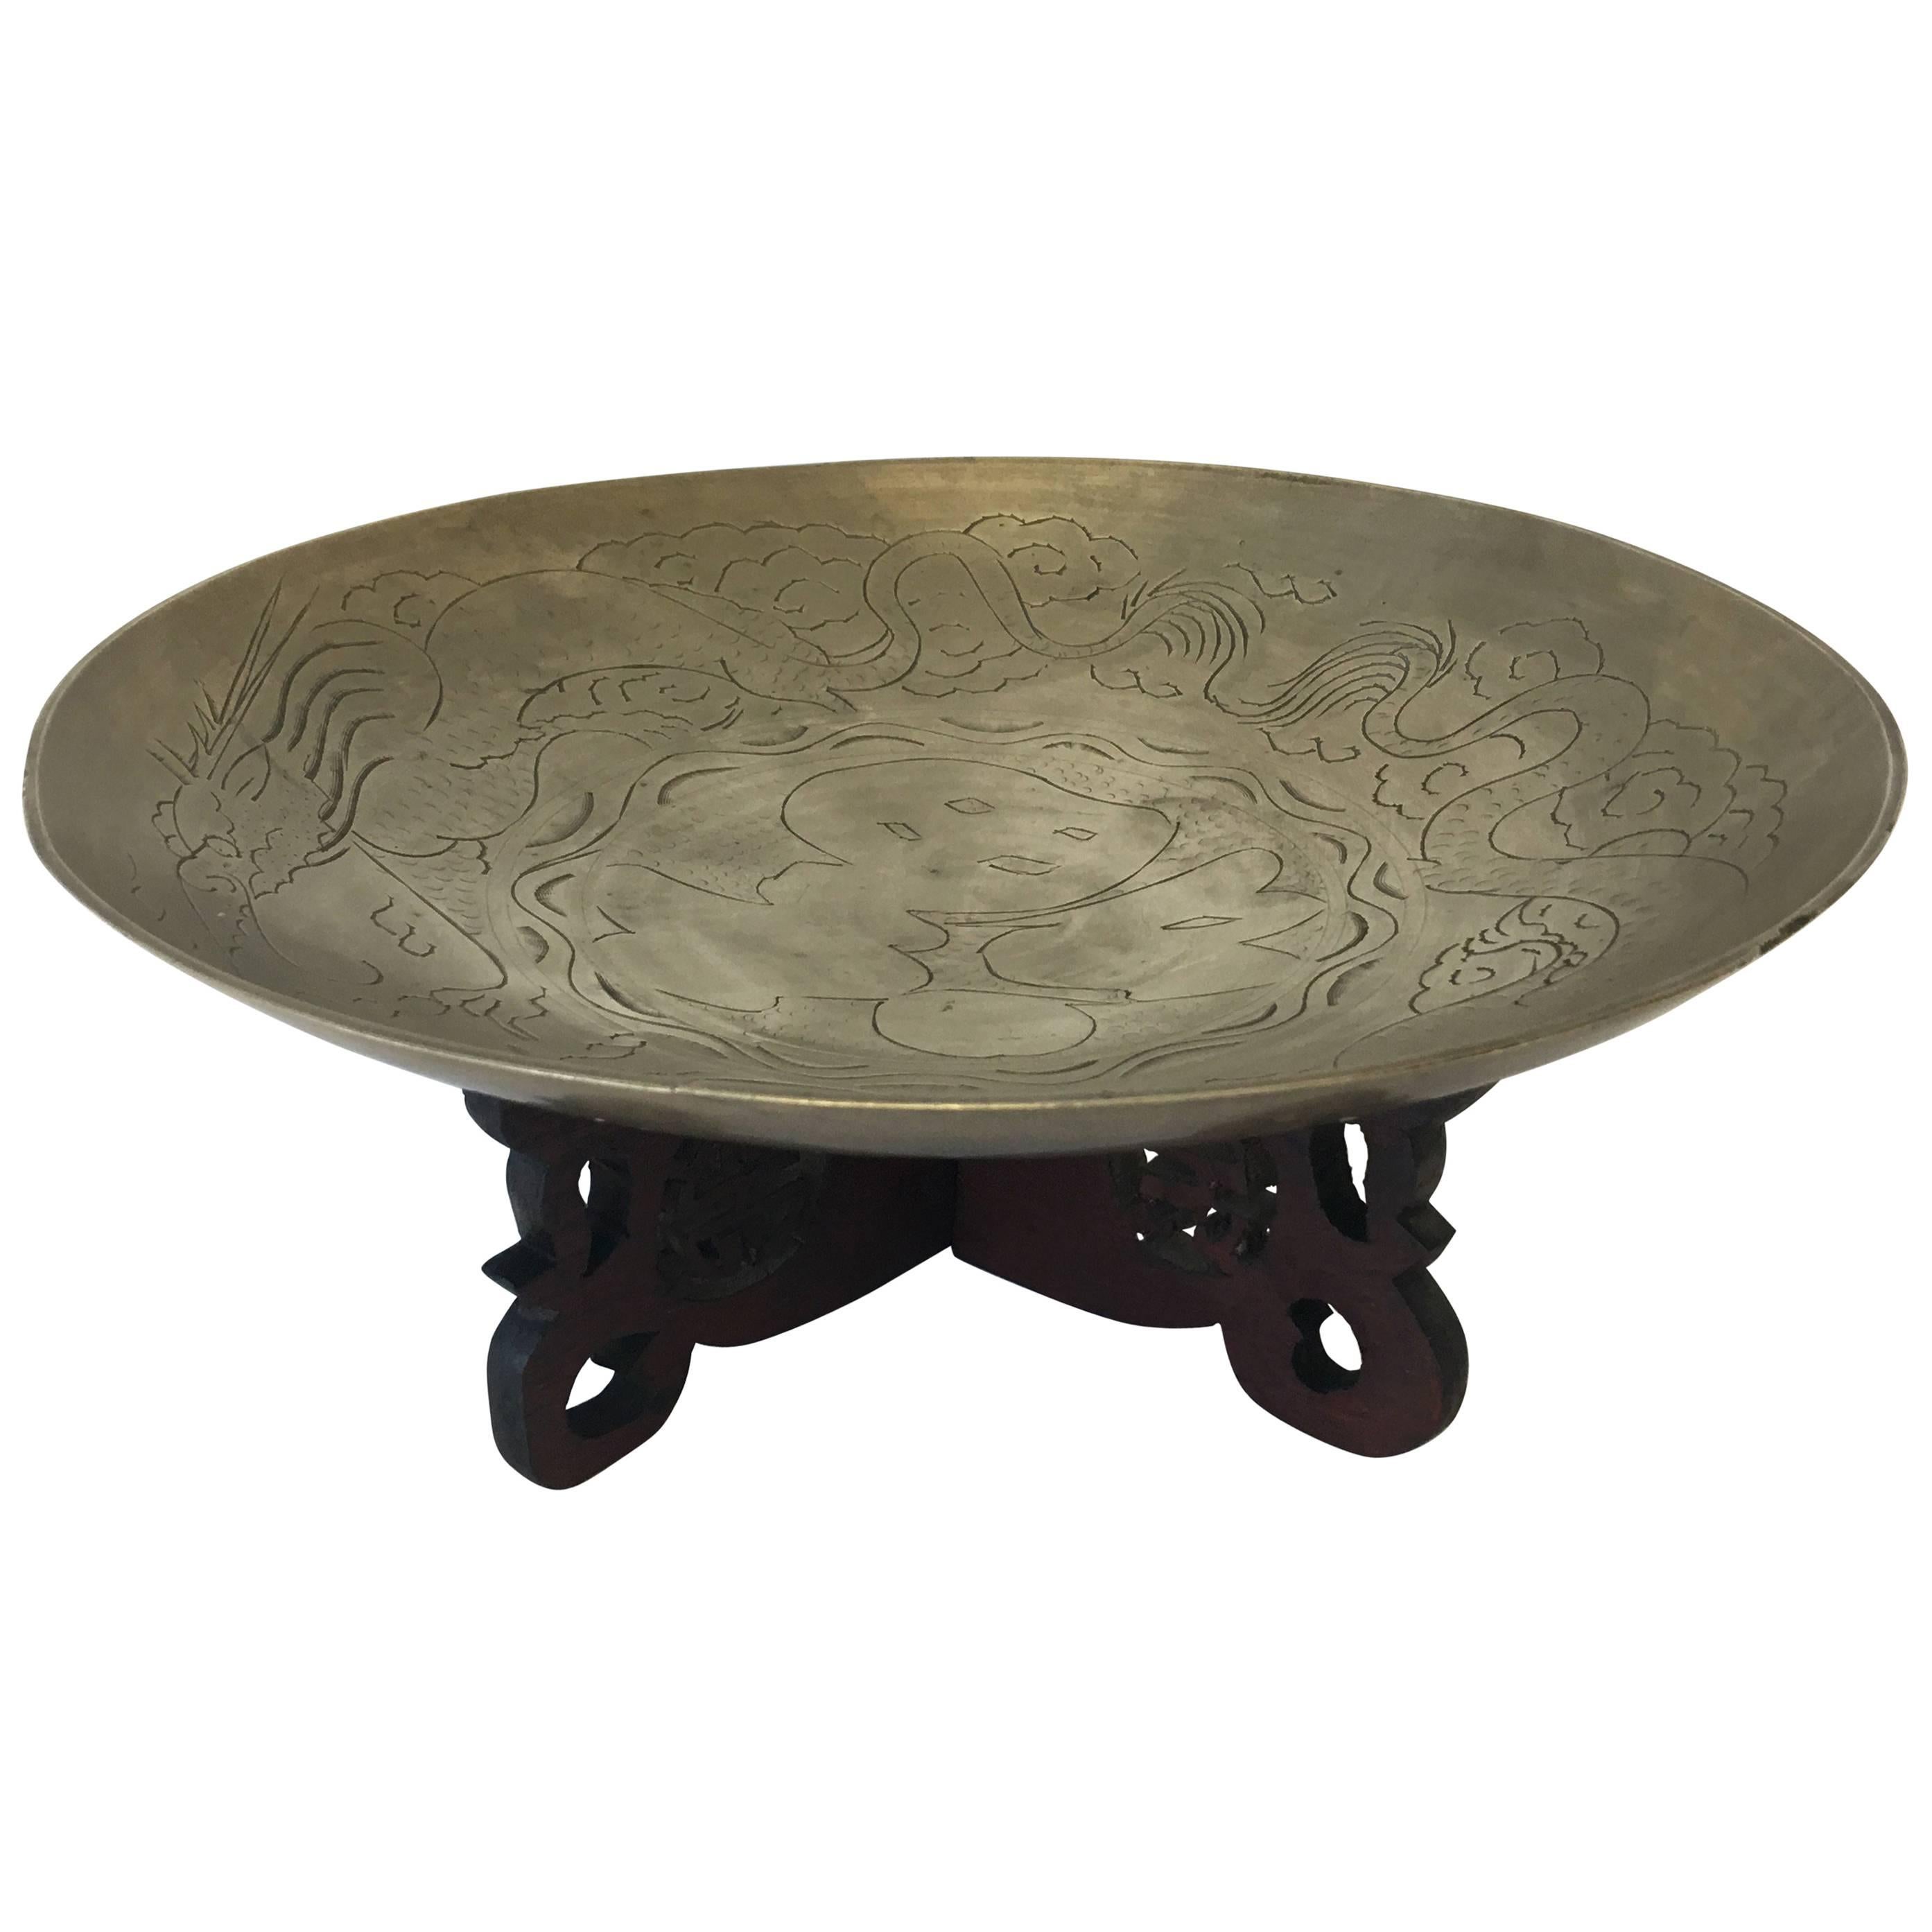 1960s Brass Chinoiserie Bowl with Dragon on Ornate Stand